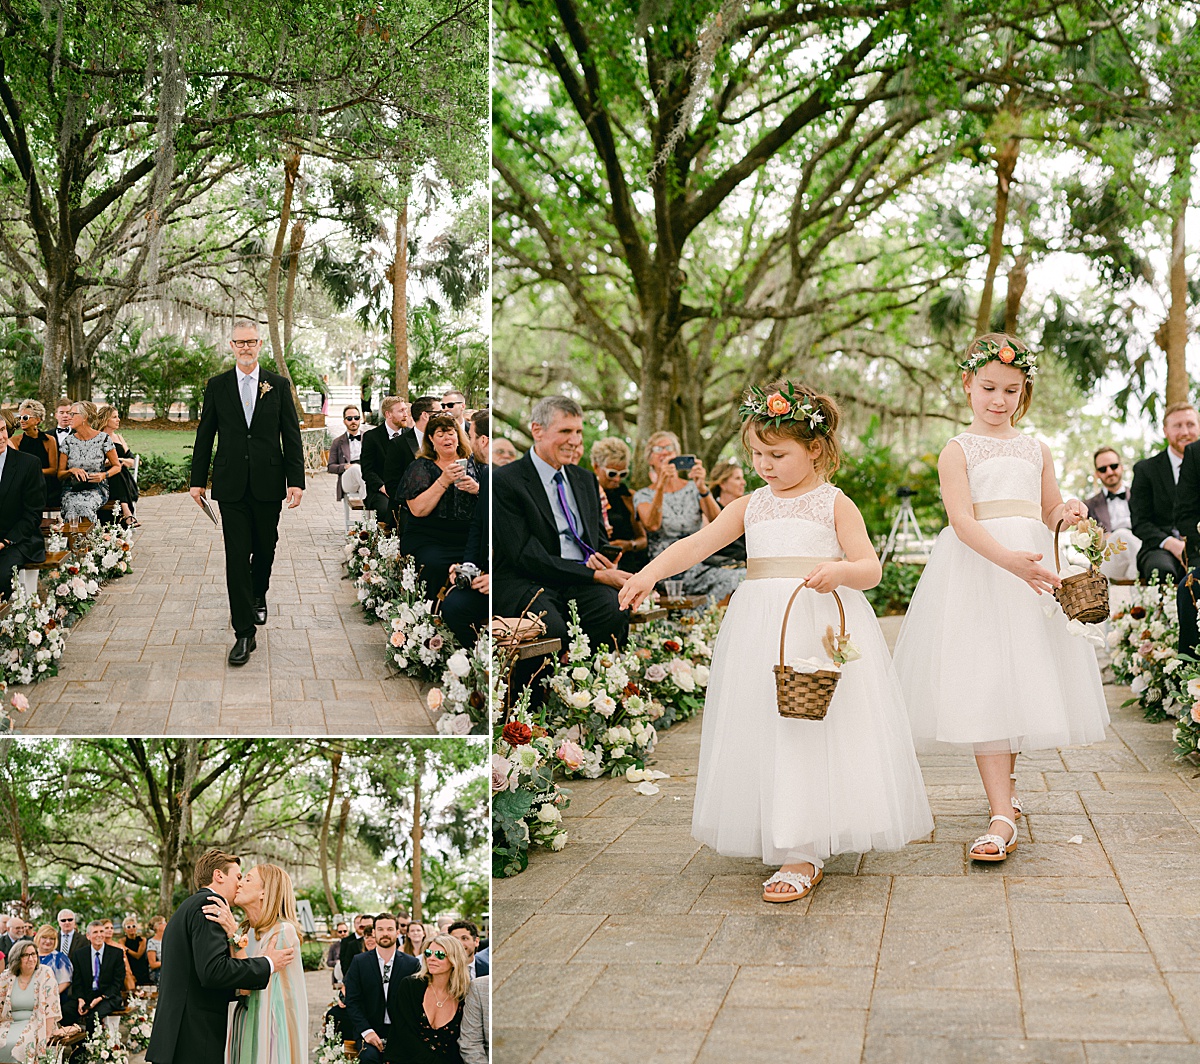 Flower girls, officiant and groom walking down the aisle of an outdoor destination wedding.